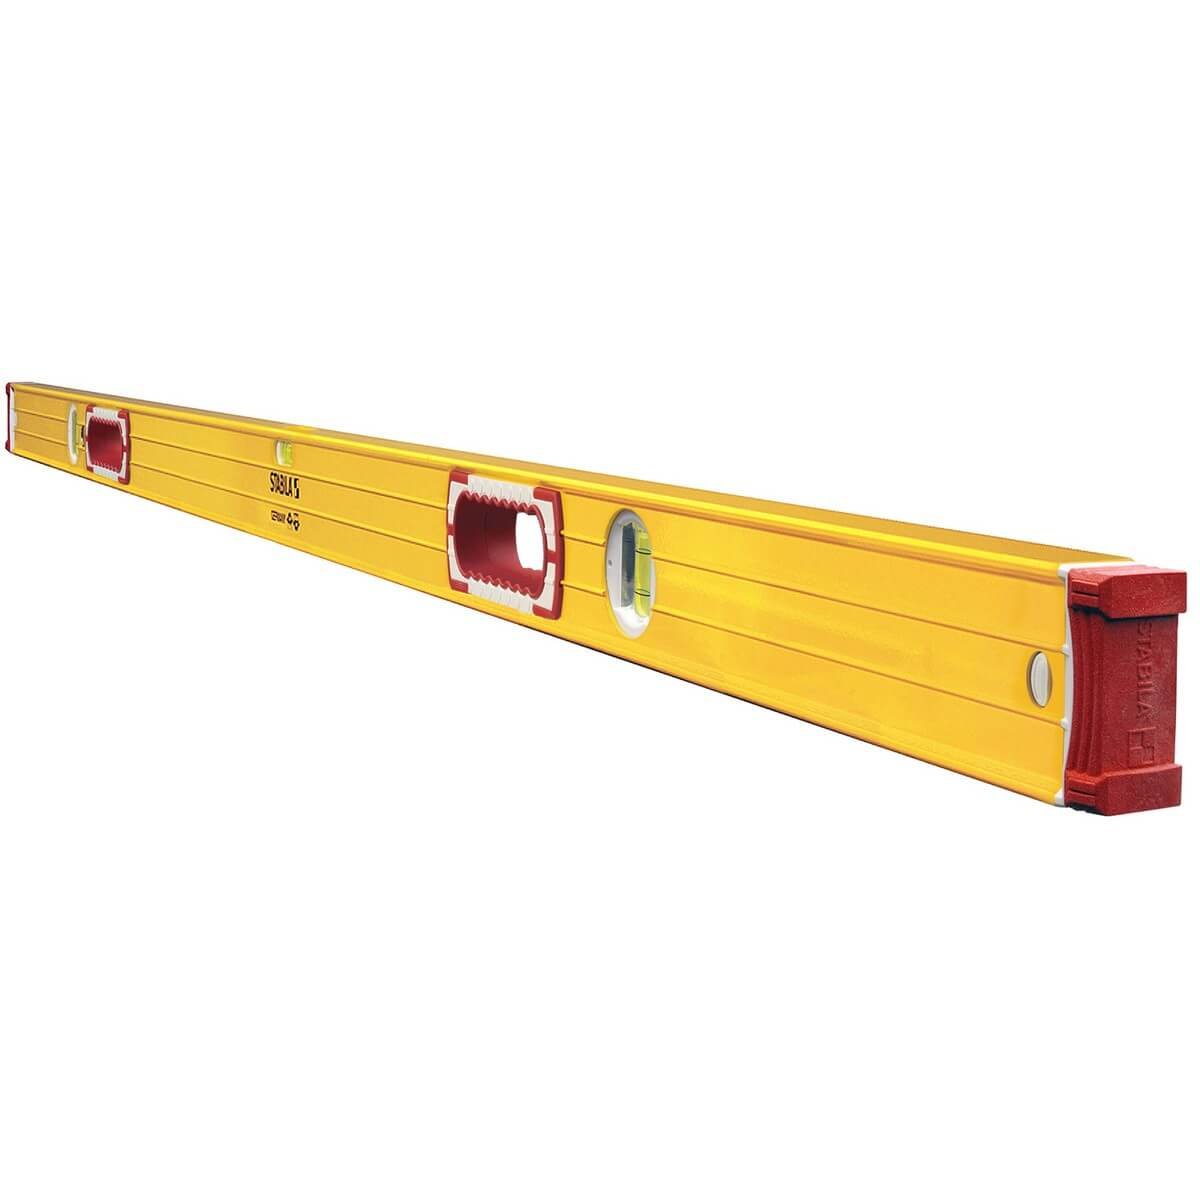 Stabila 37472 - 72-Inch builders level, High Strength Frame, Accuracy Certified